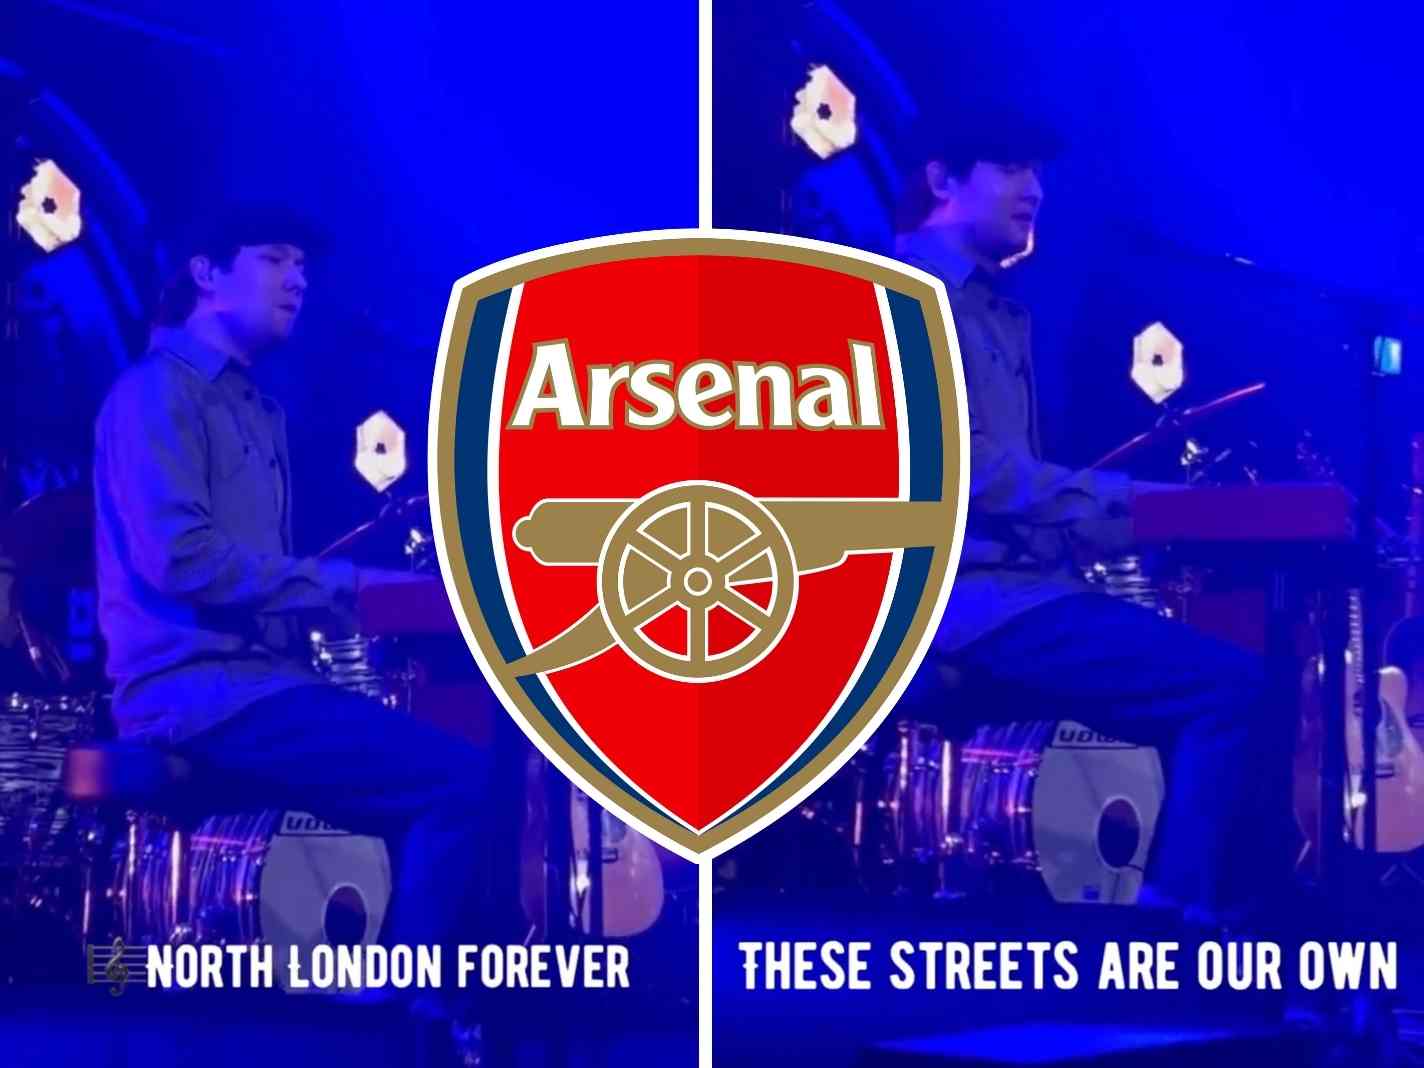 The Louis Dunford song that is tailormade to become an Arsenal anthem